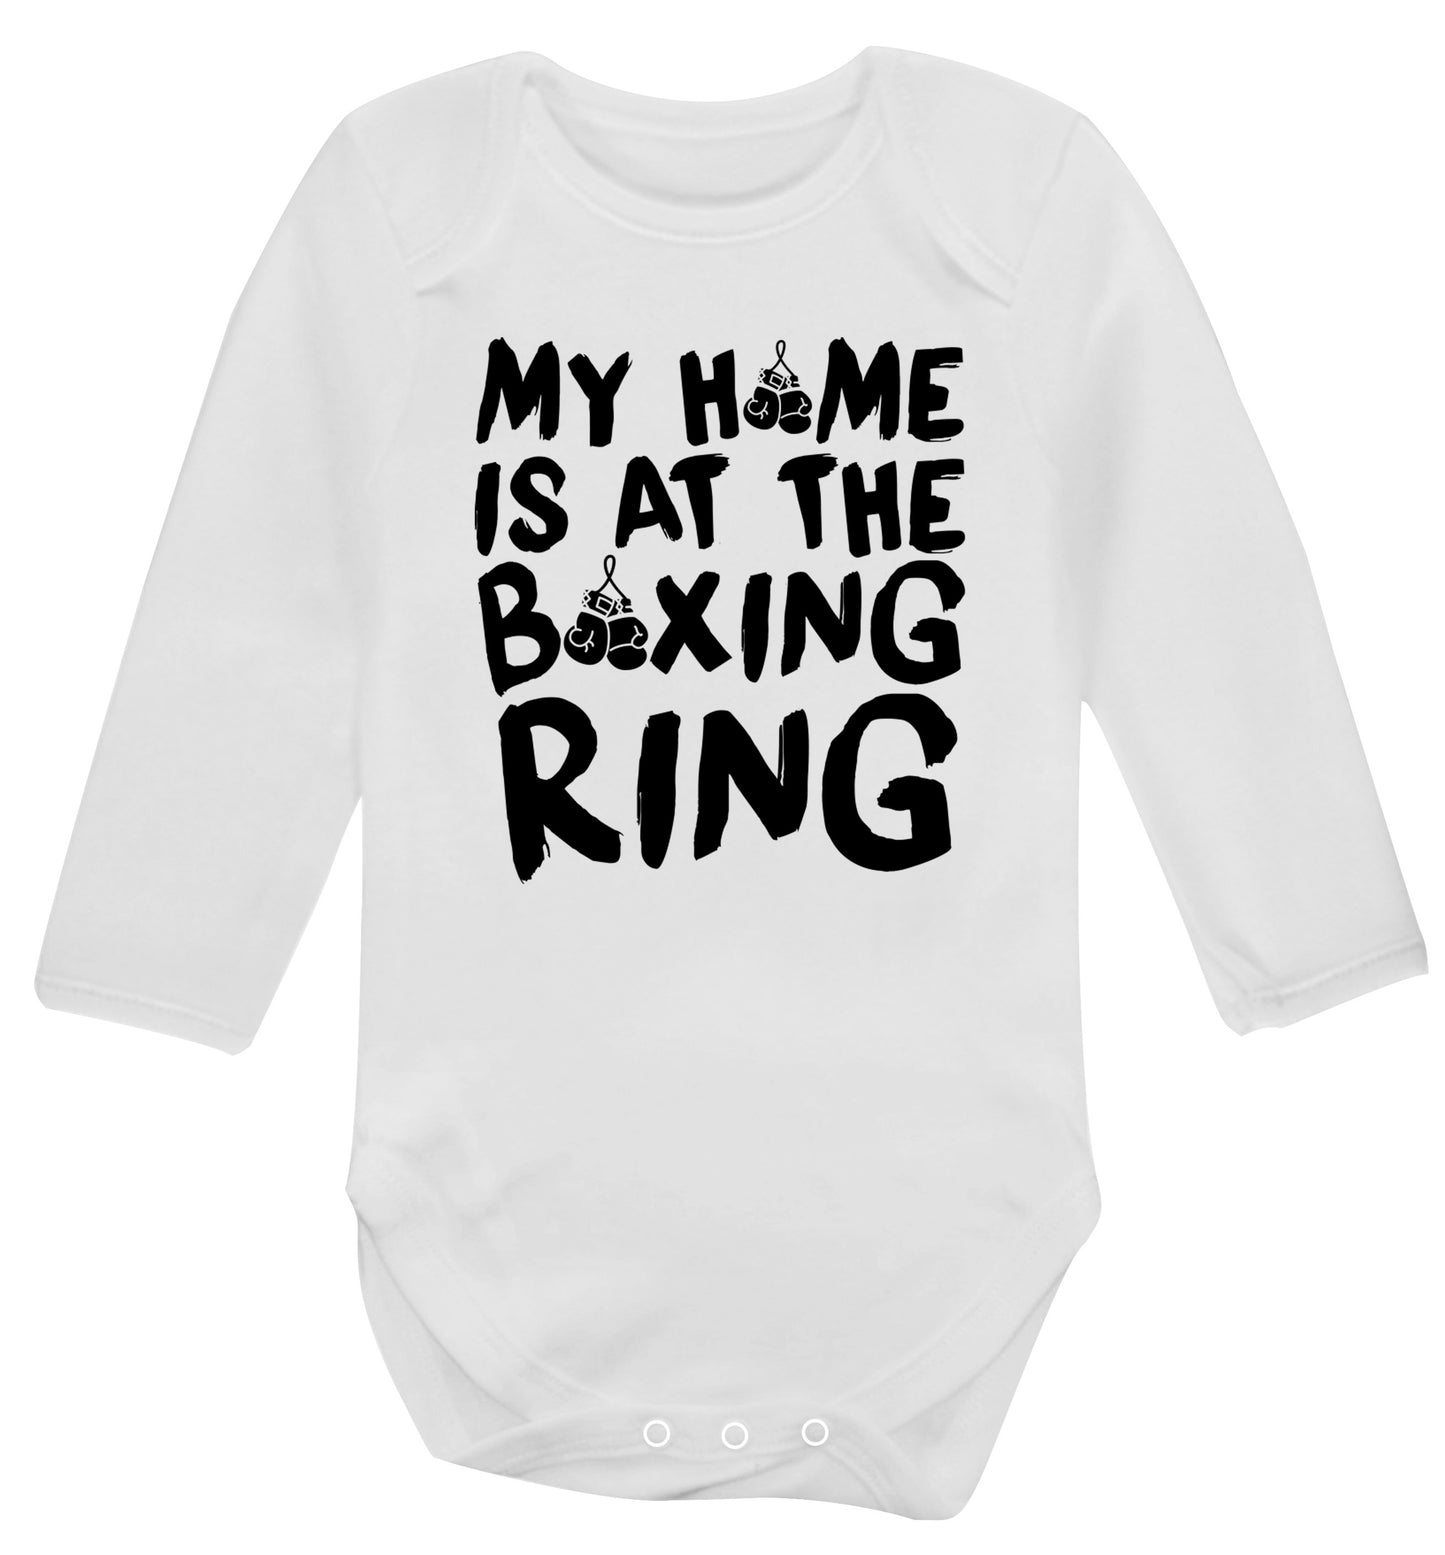 My home is at the boxing ring Baby Vest long sleeved white 6-12 months